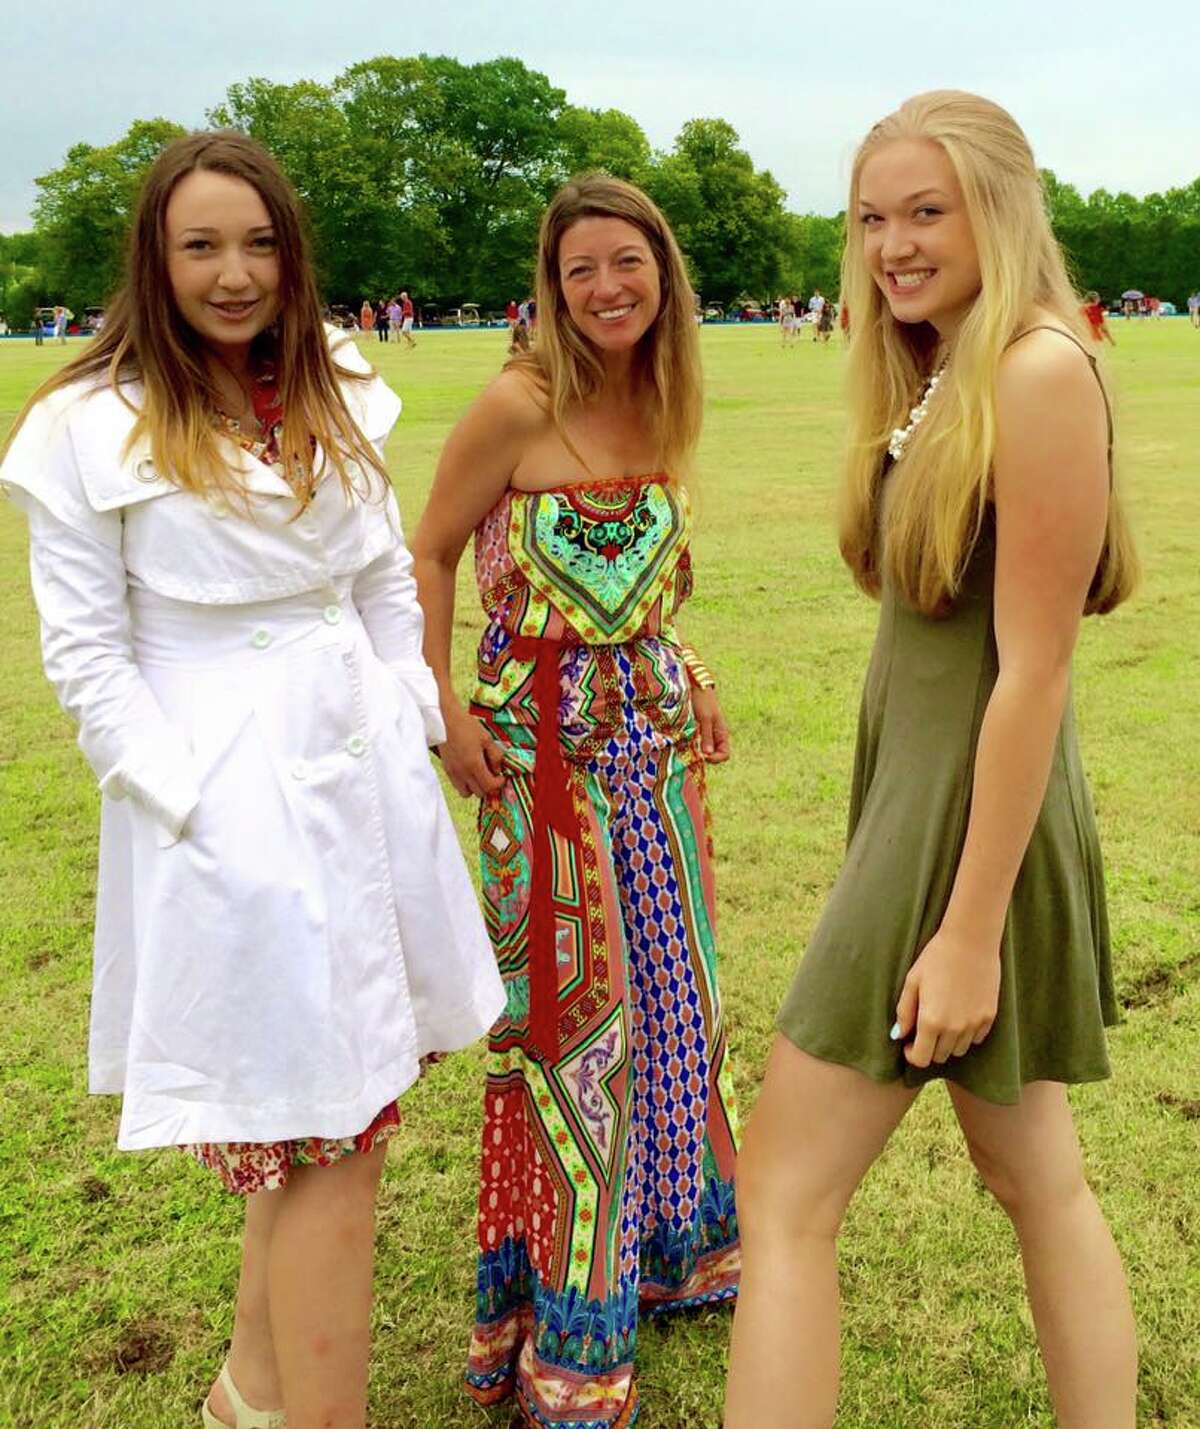 Were you Seen attending the Midsummer Celebration Tournament at the Saratoga Polo Association on Friday, July 17, 2015?